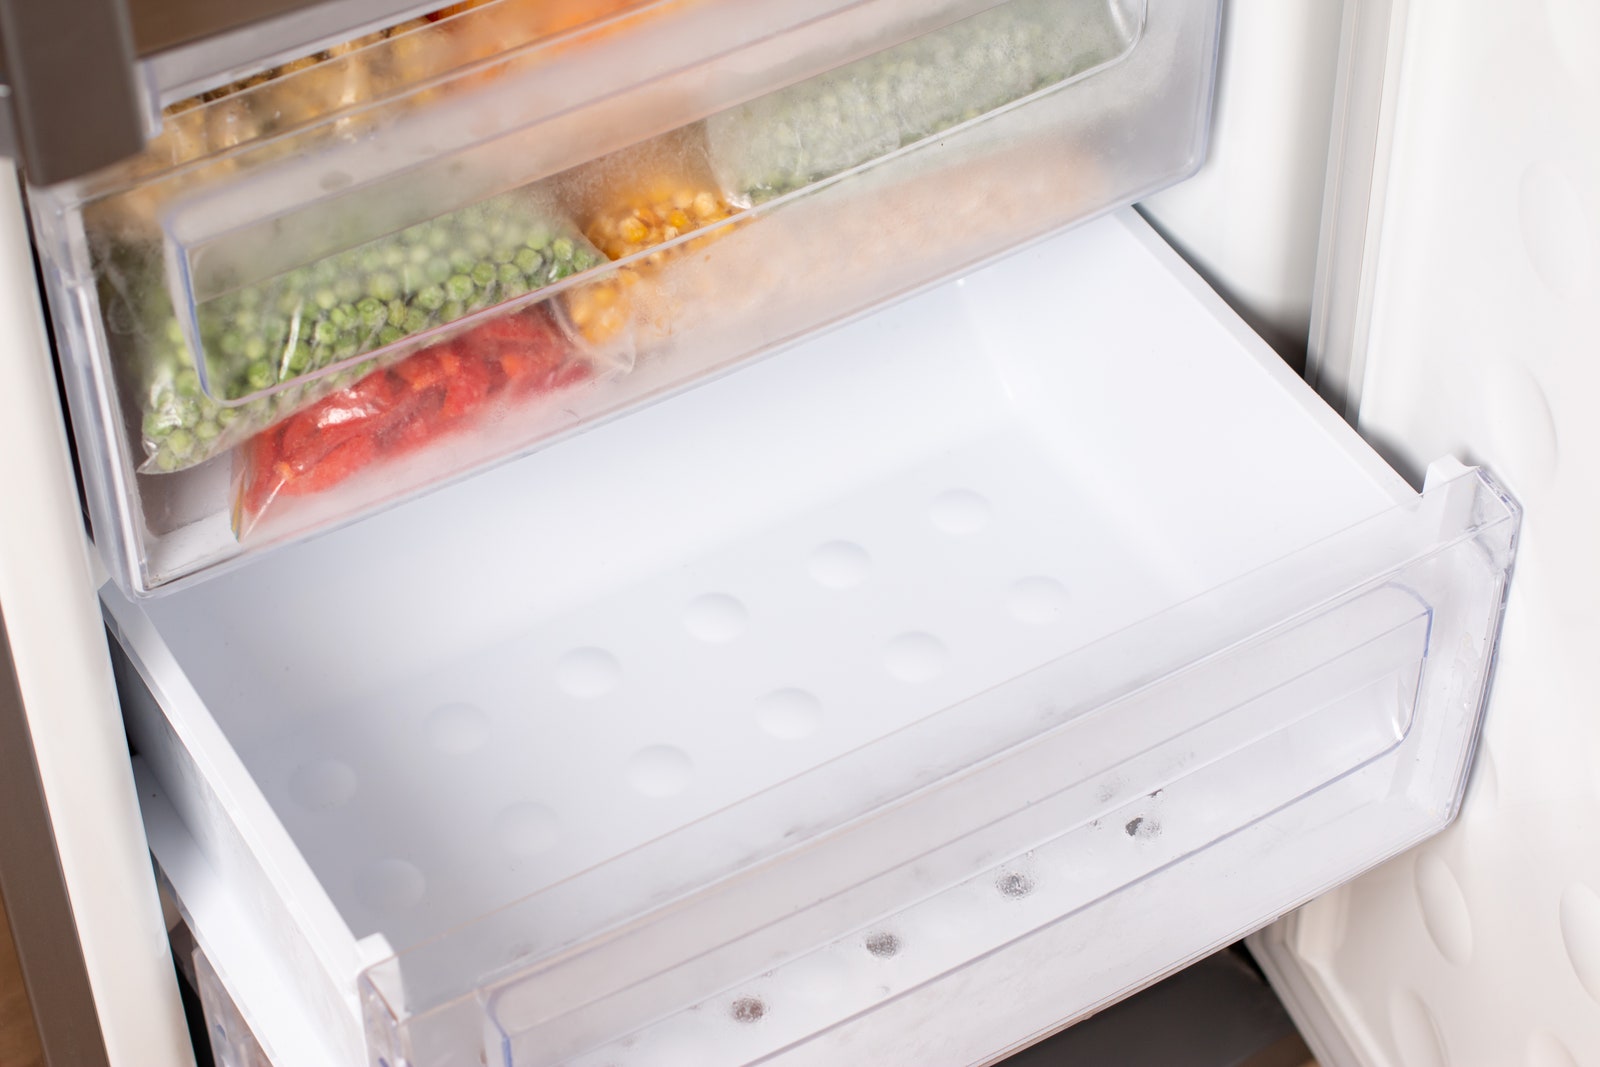 You want to make sure the fridge is not only clean inside but around under and behind it as well.